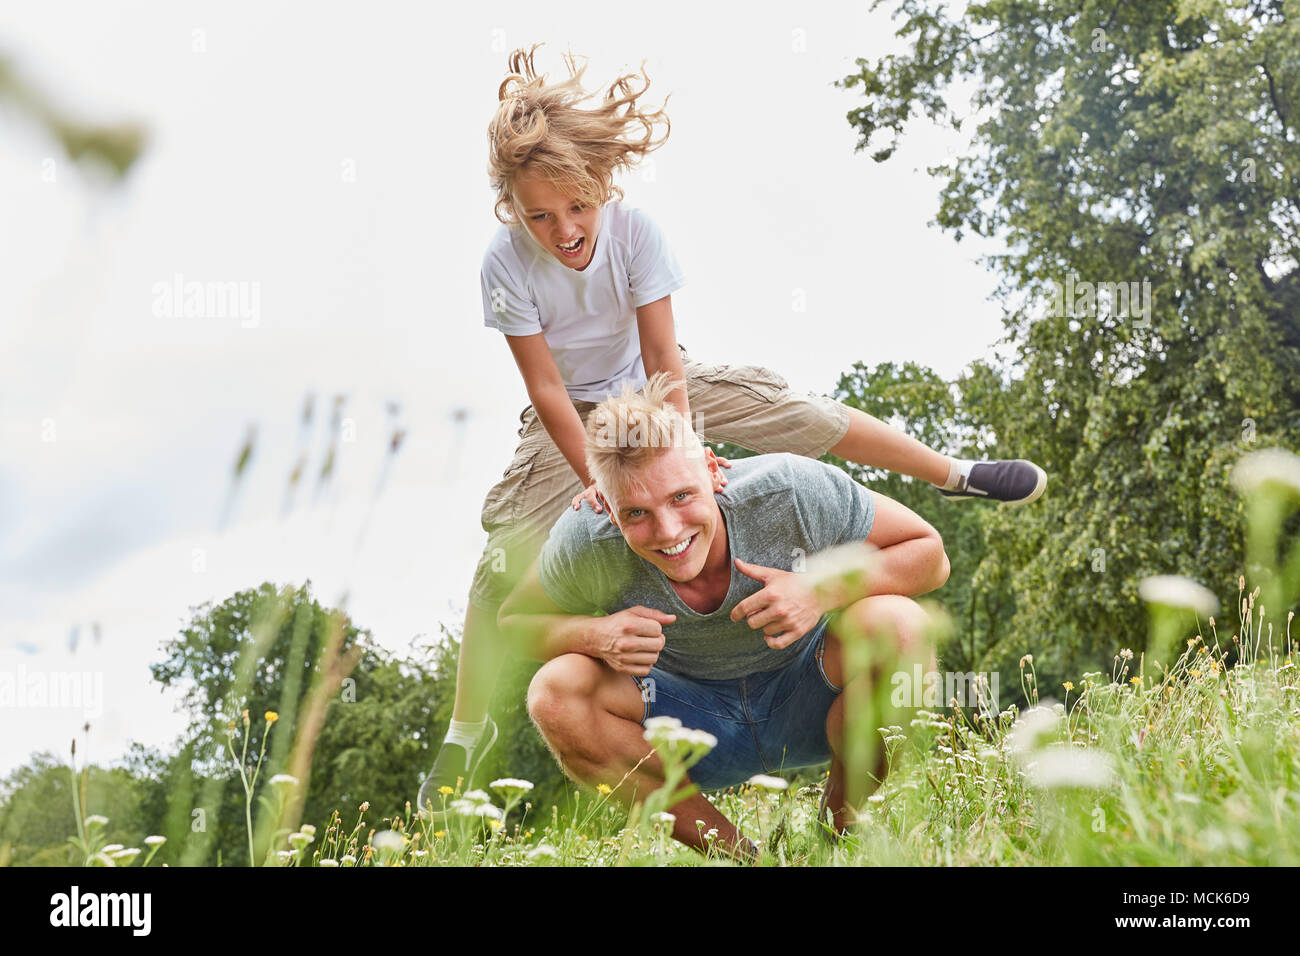 Boy in leapfrog with his father on a meadow in summer Stock Photo